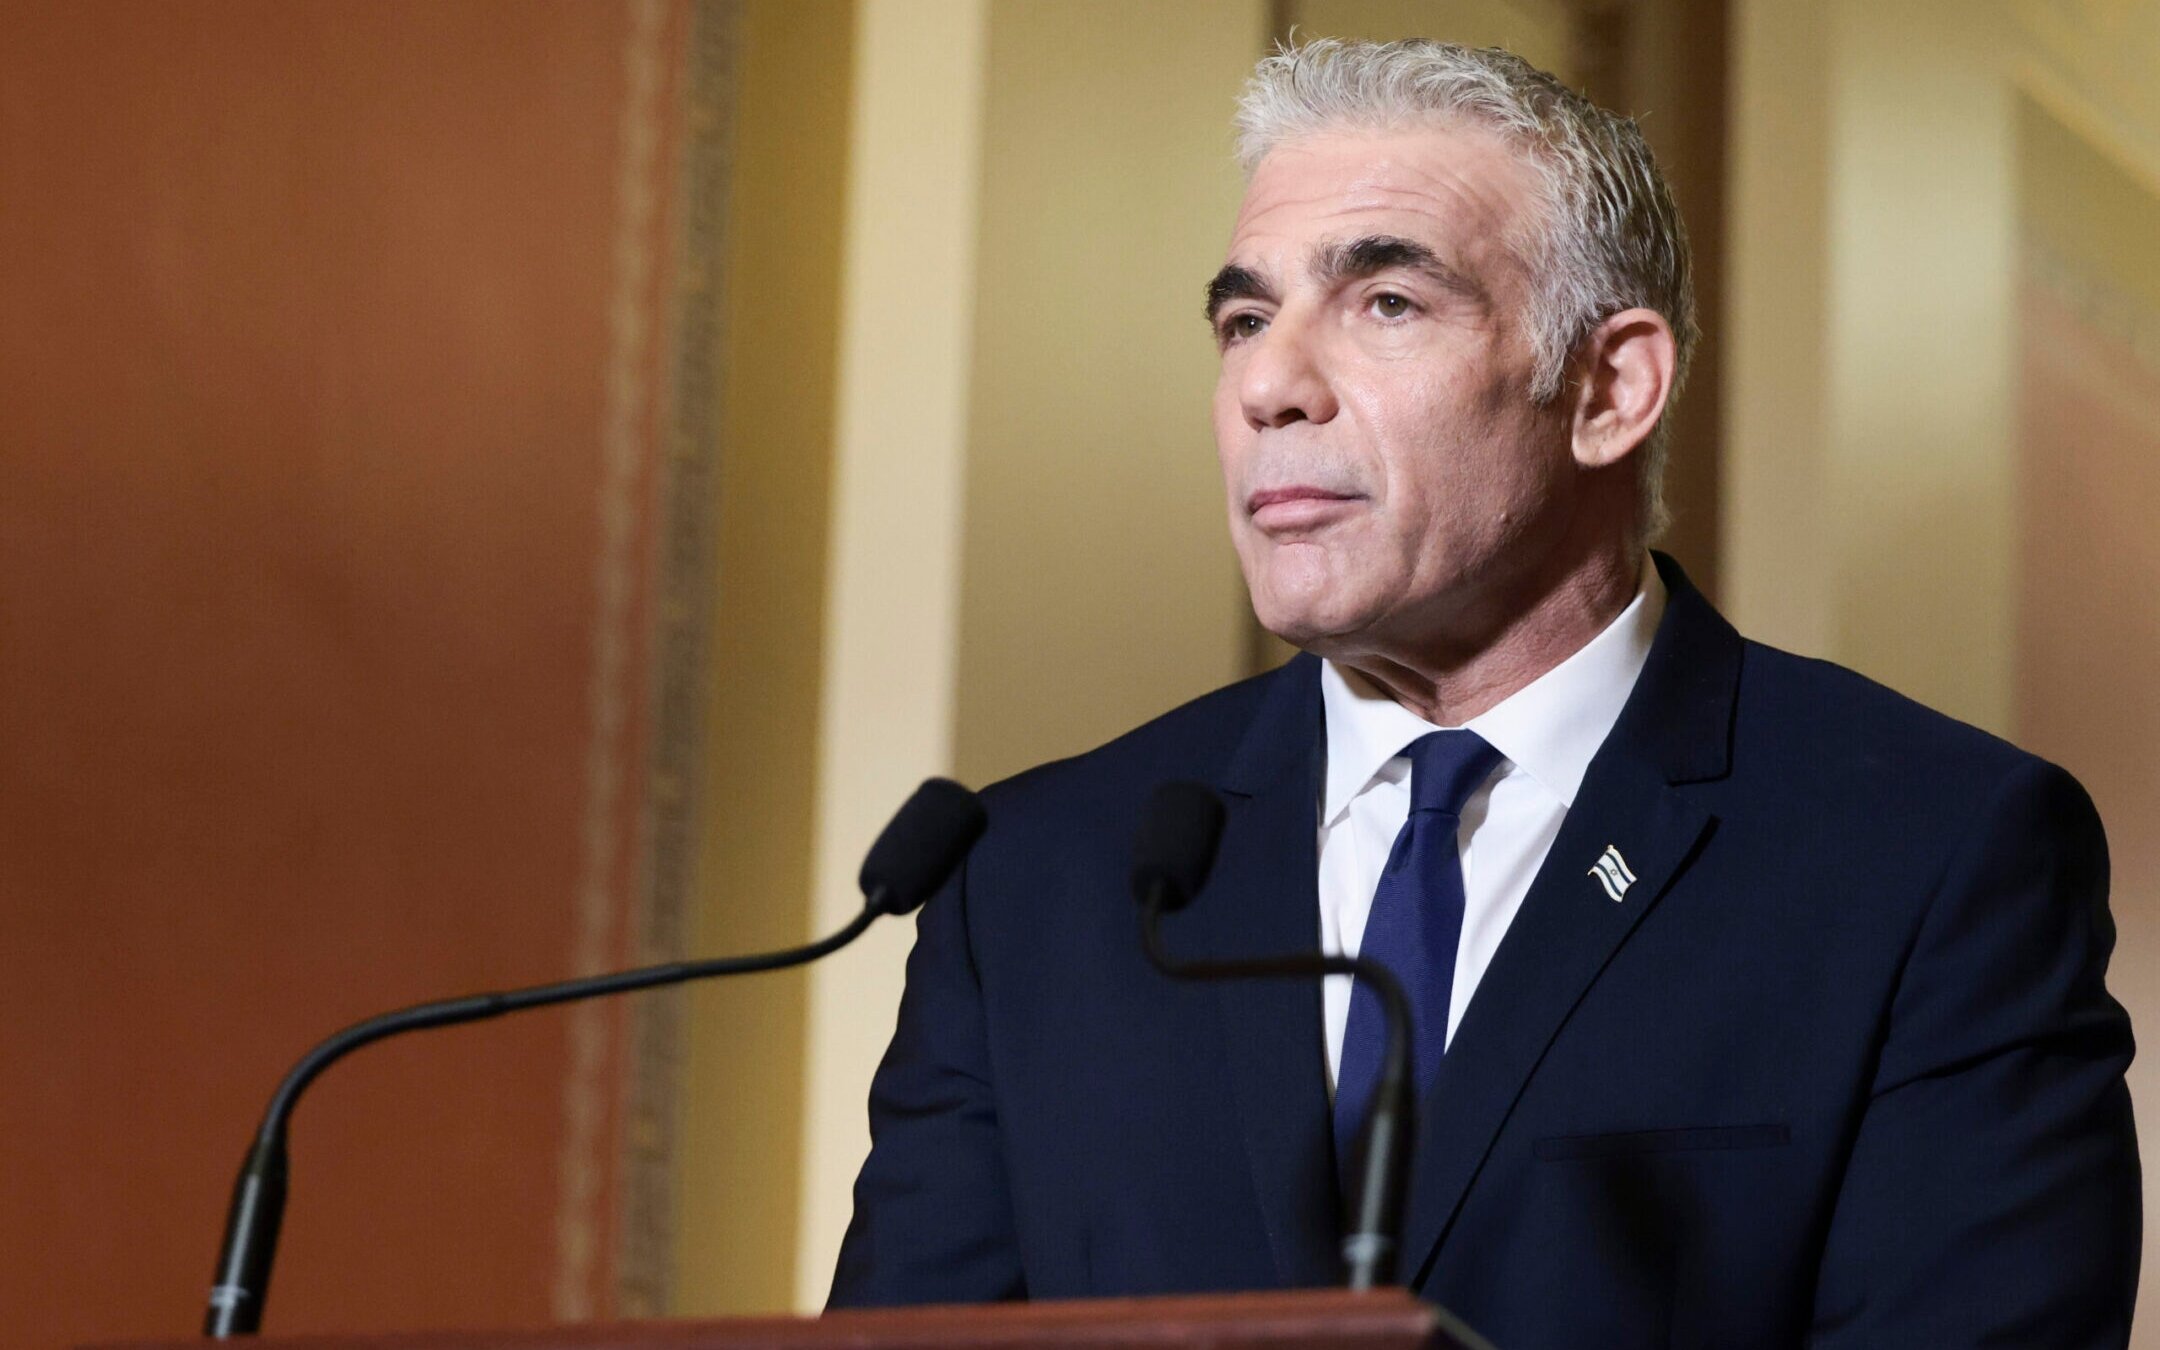 Yair Lapid, then Israel’s foreign minister, speaks at the U.S. Capitol in Washington, D.C., Oct. 12, 2022. (Anna Moneymaker/Getty Images)